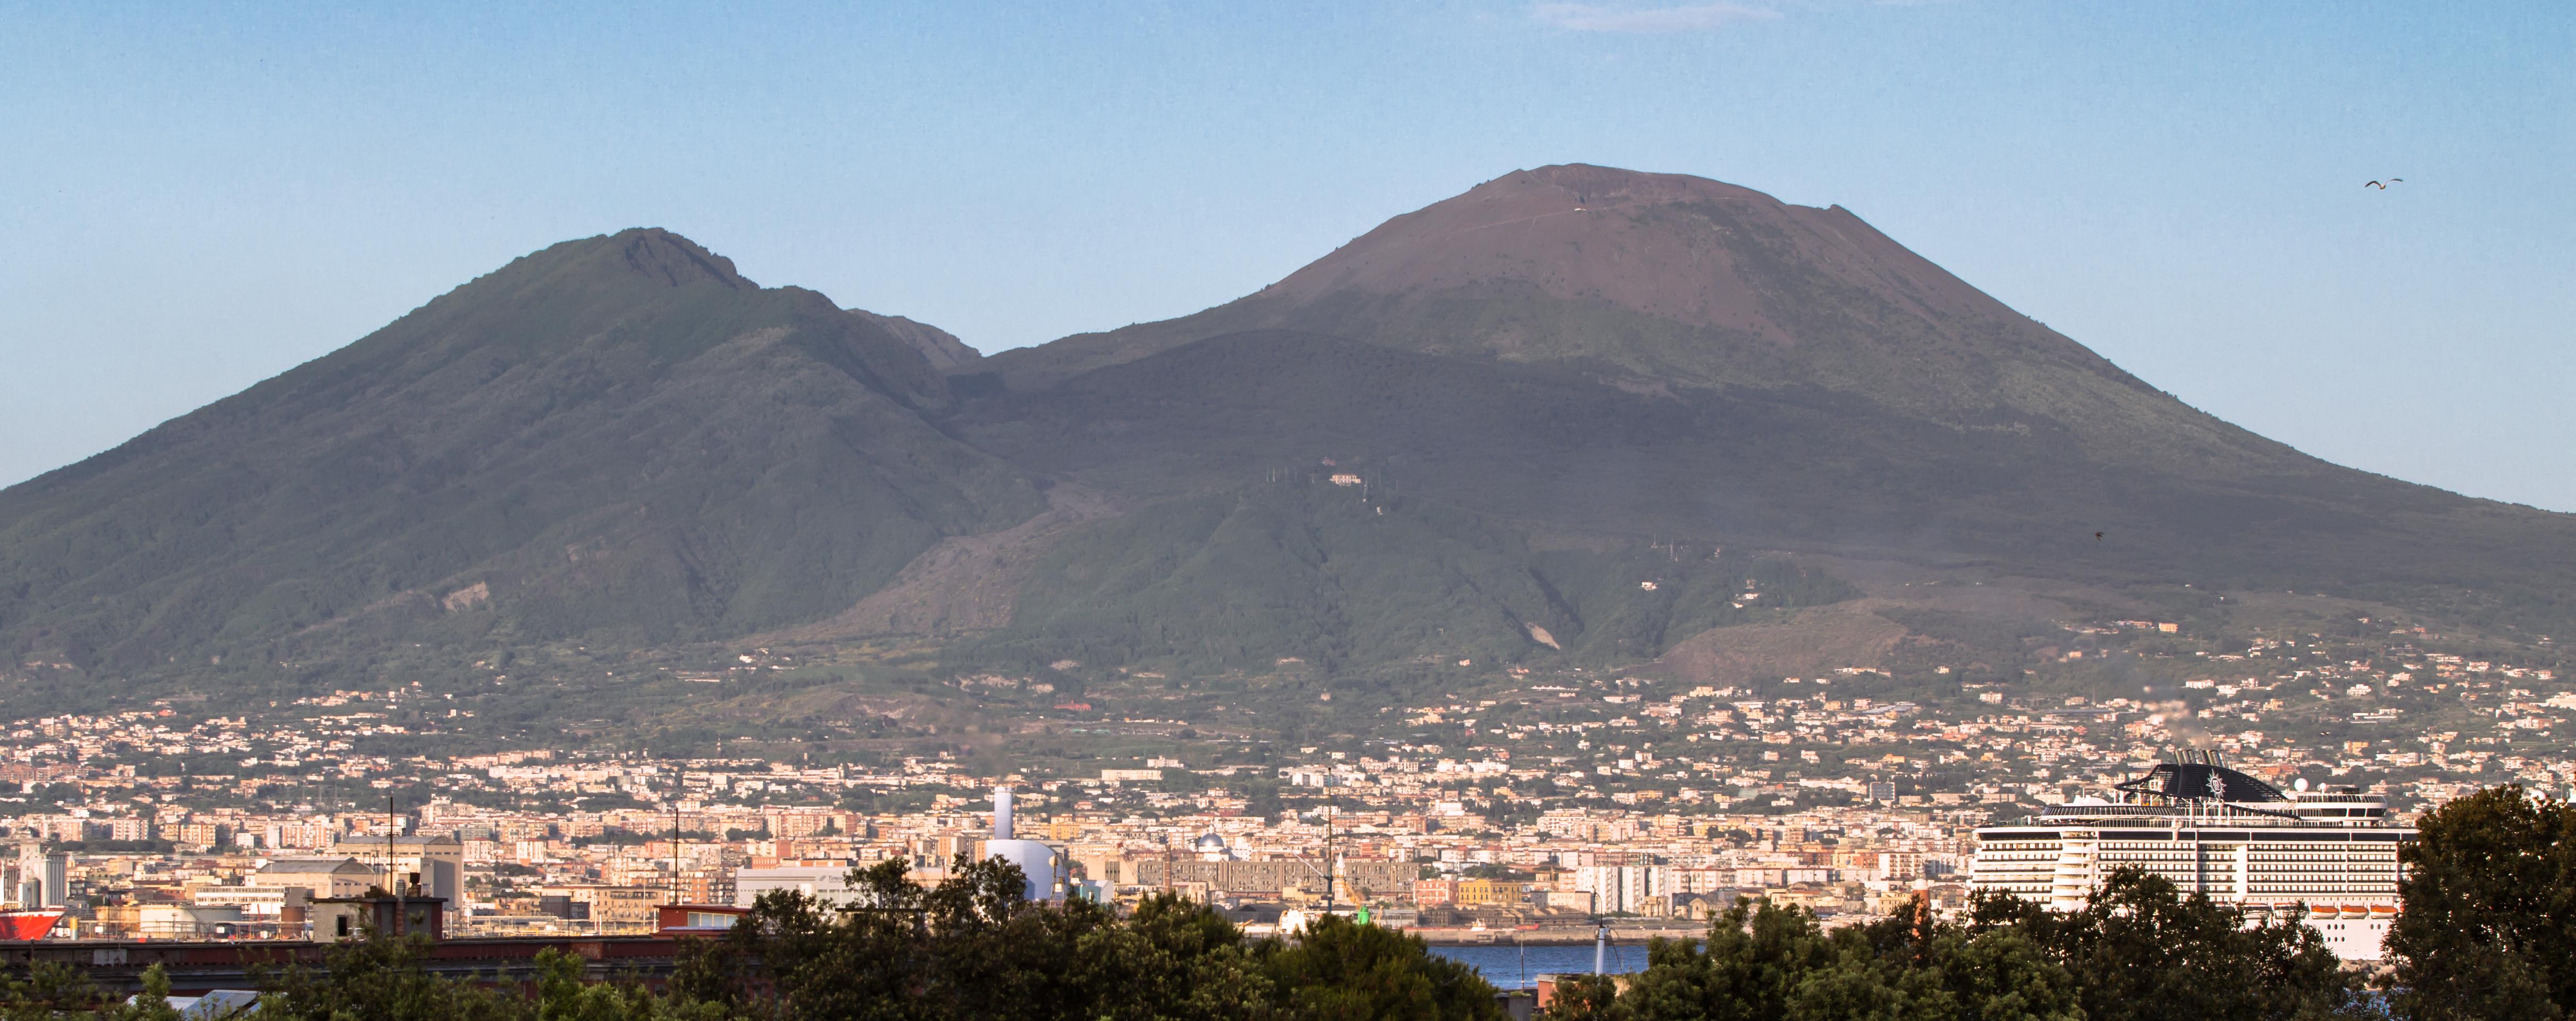 Excursion to Vesuvius - leaving from Naples